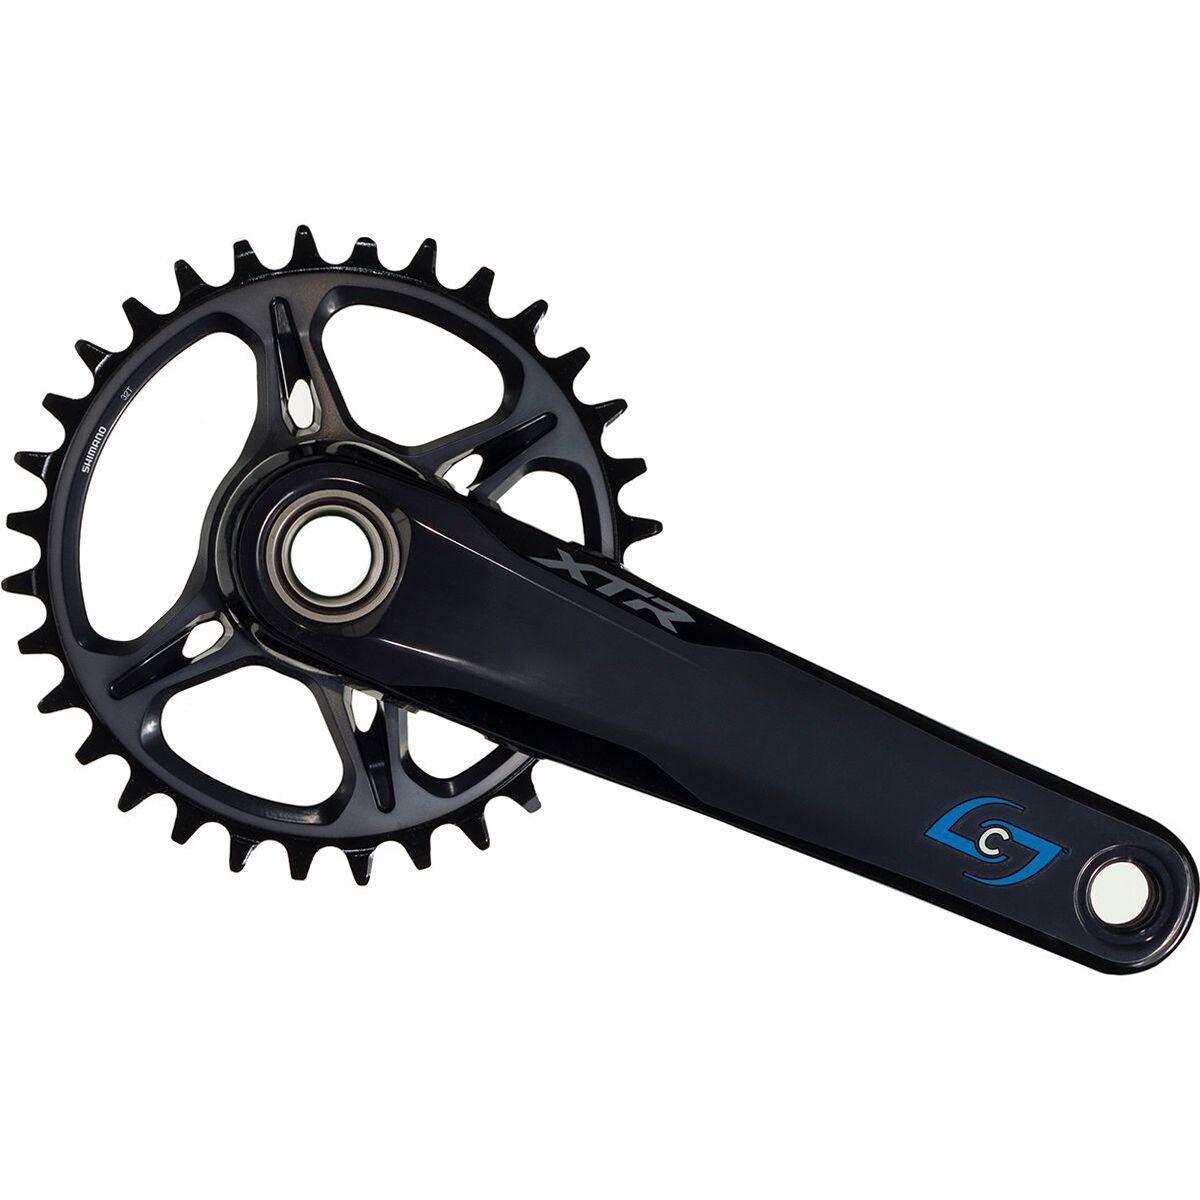 Stages Cycling Shimano XTR M9120 Gen 3 R Power Meter Crank Arm Stealth Grey, 170mm -  X91R-C